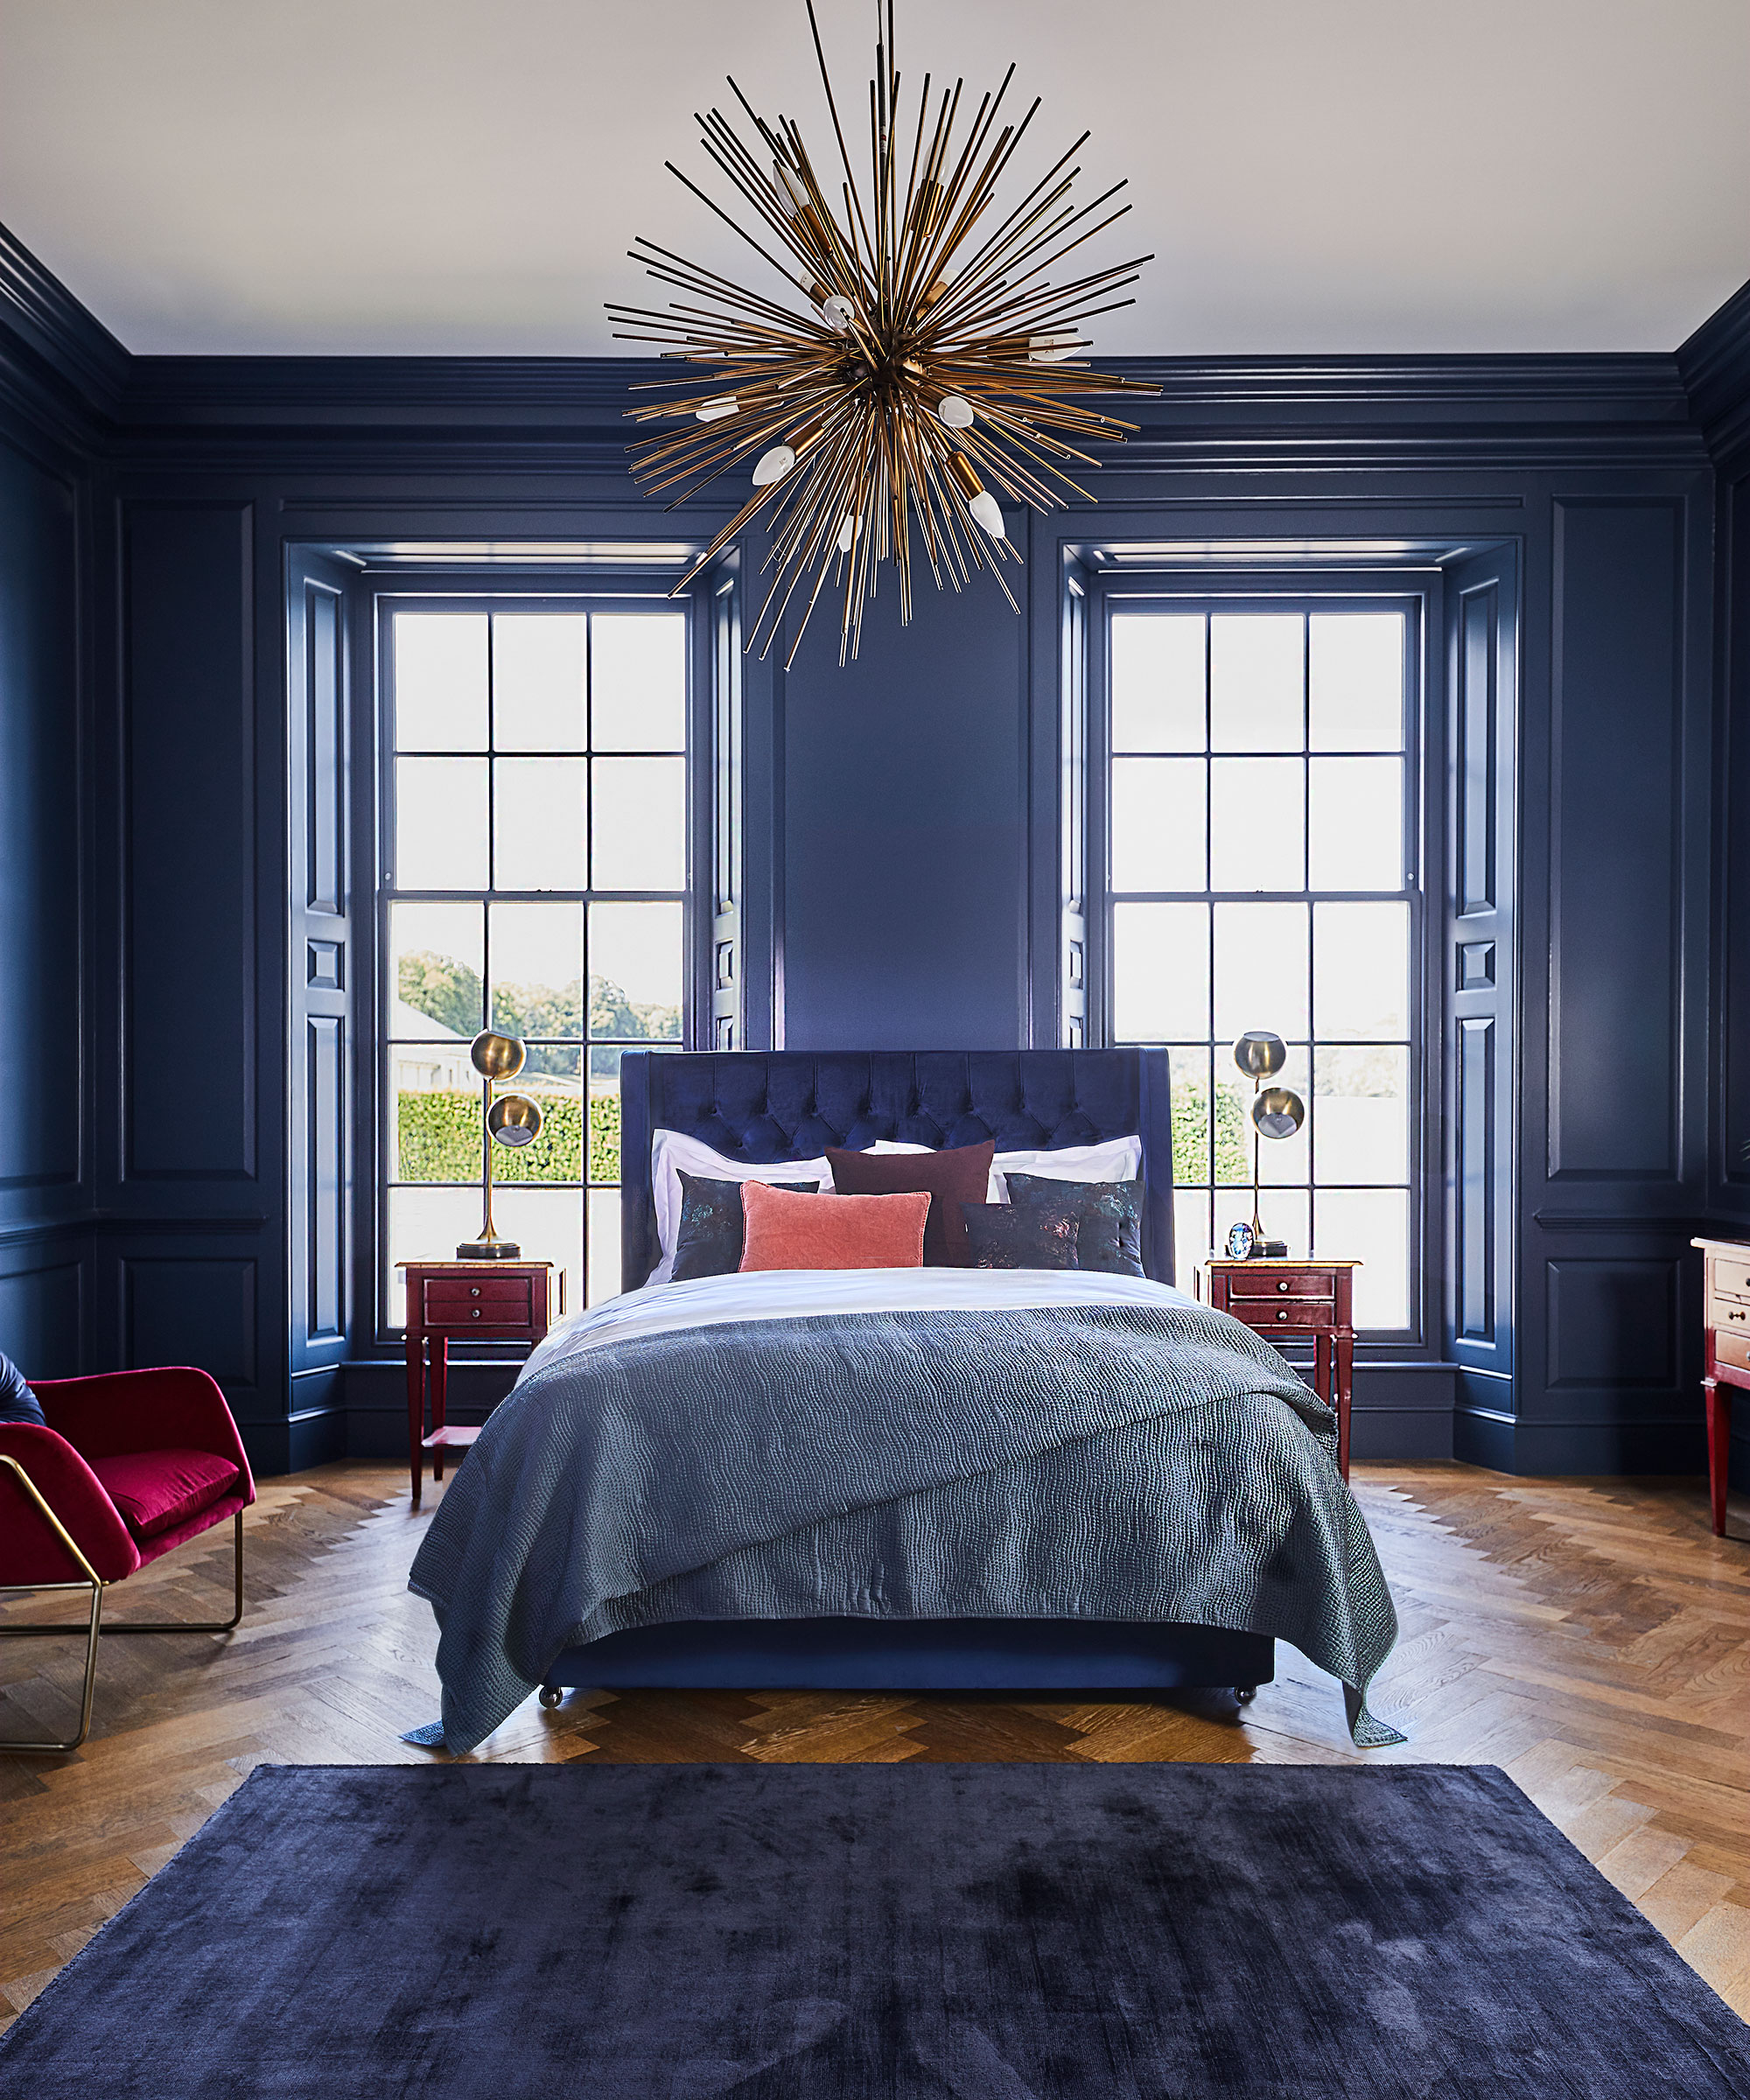 A blue bed in a large bedroom with dark blue walls and a statement pendant light